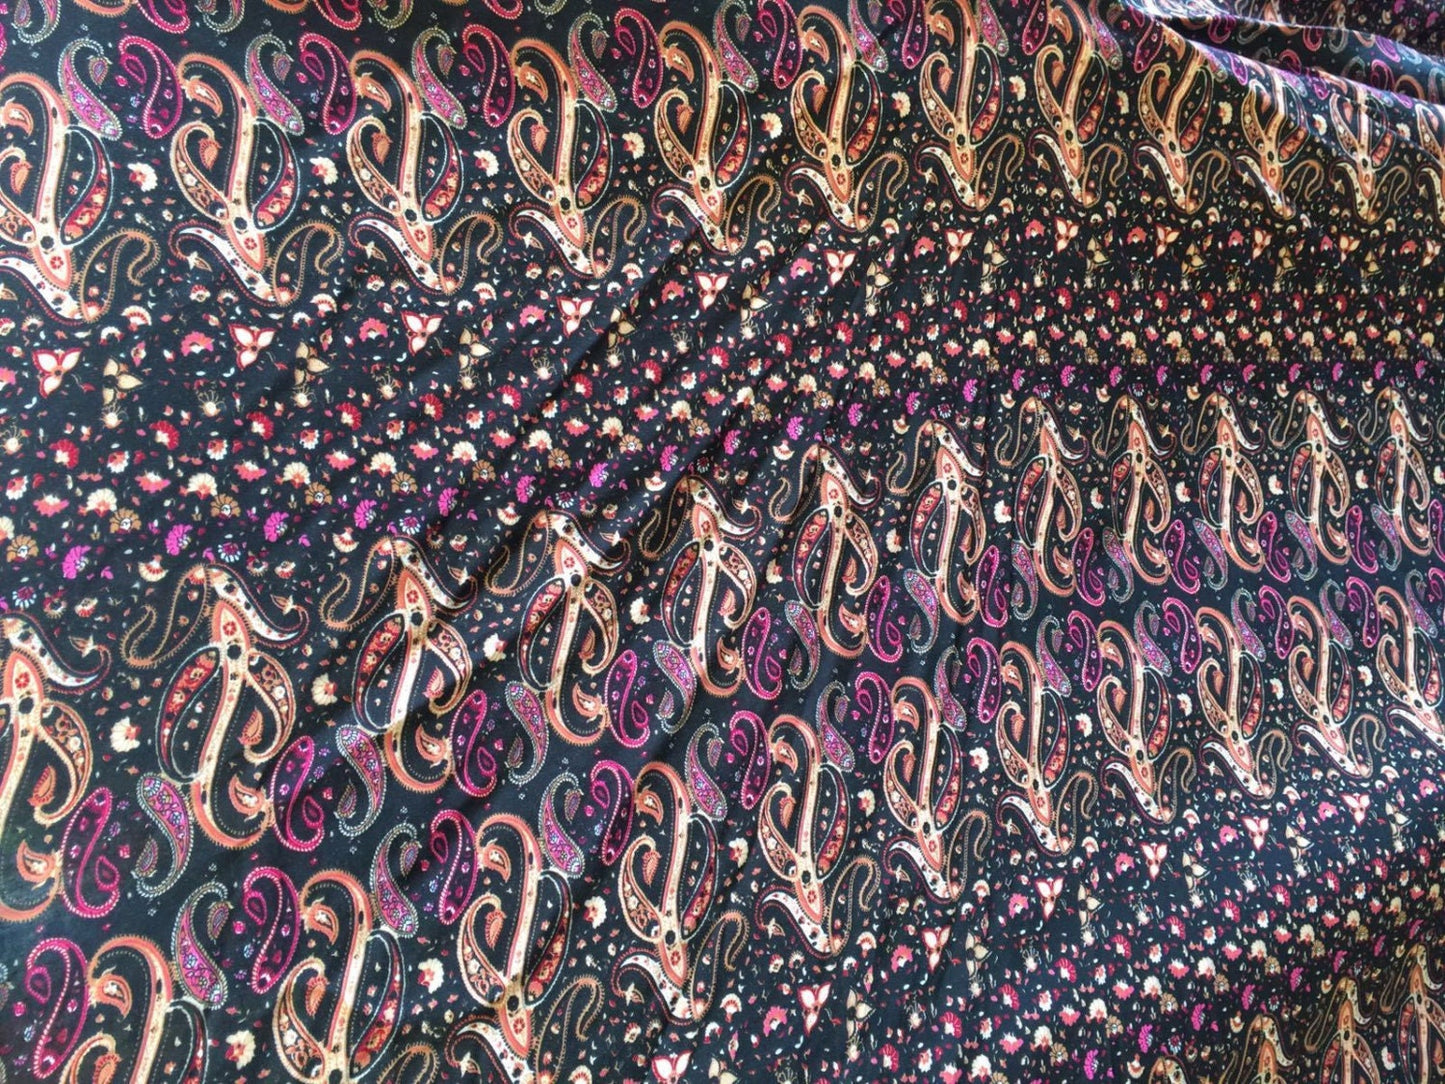 100% Rayon. Gorgeous Eurasian inspired print. Paisleys with hues of browns and fuchsia. 58-60 inches wide sold by the yard